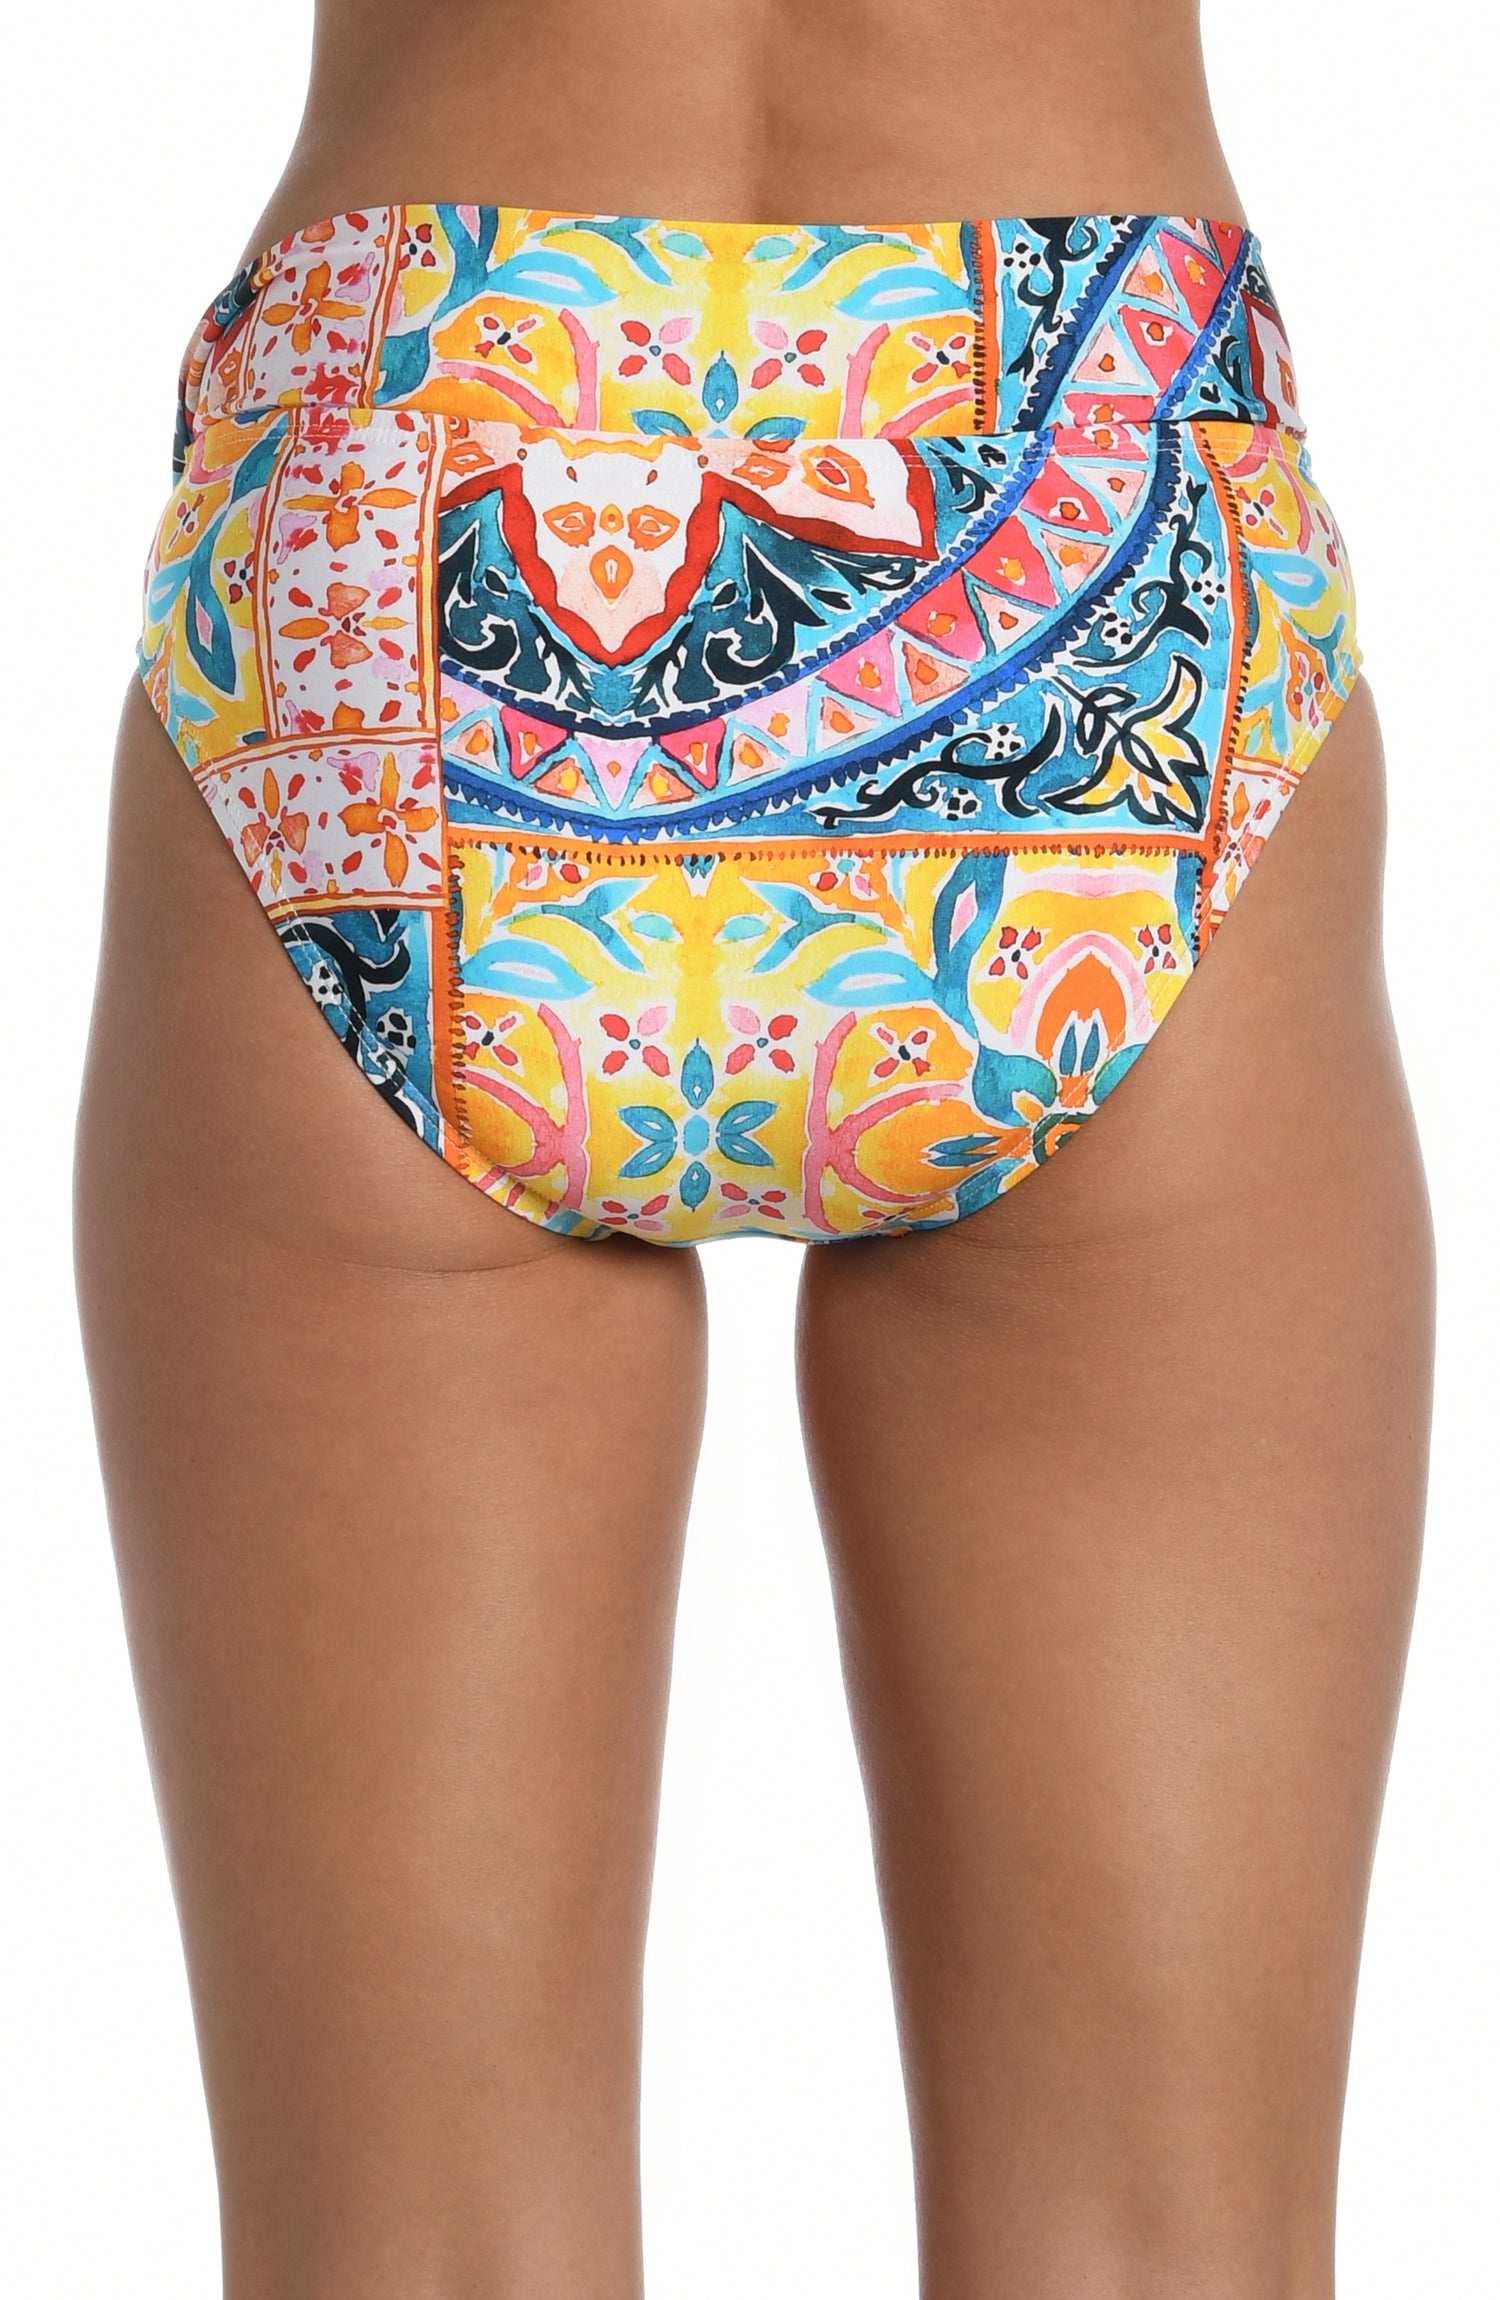 Model is wearing a moroccan inspired multi colored printed high waist bottom from our Soleil collection!